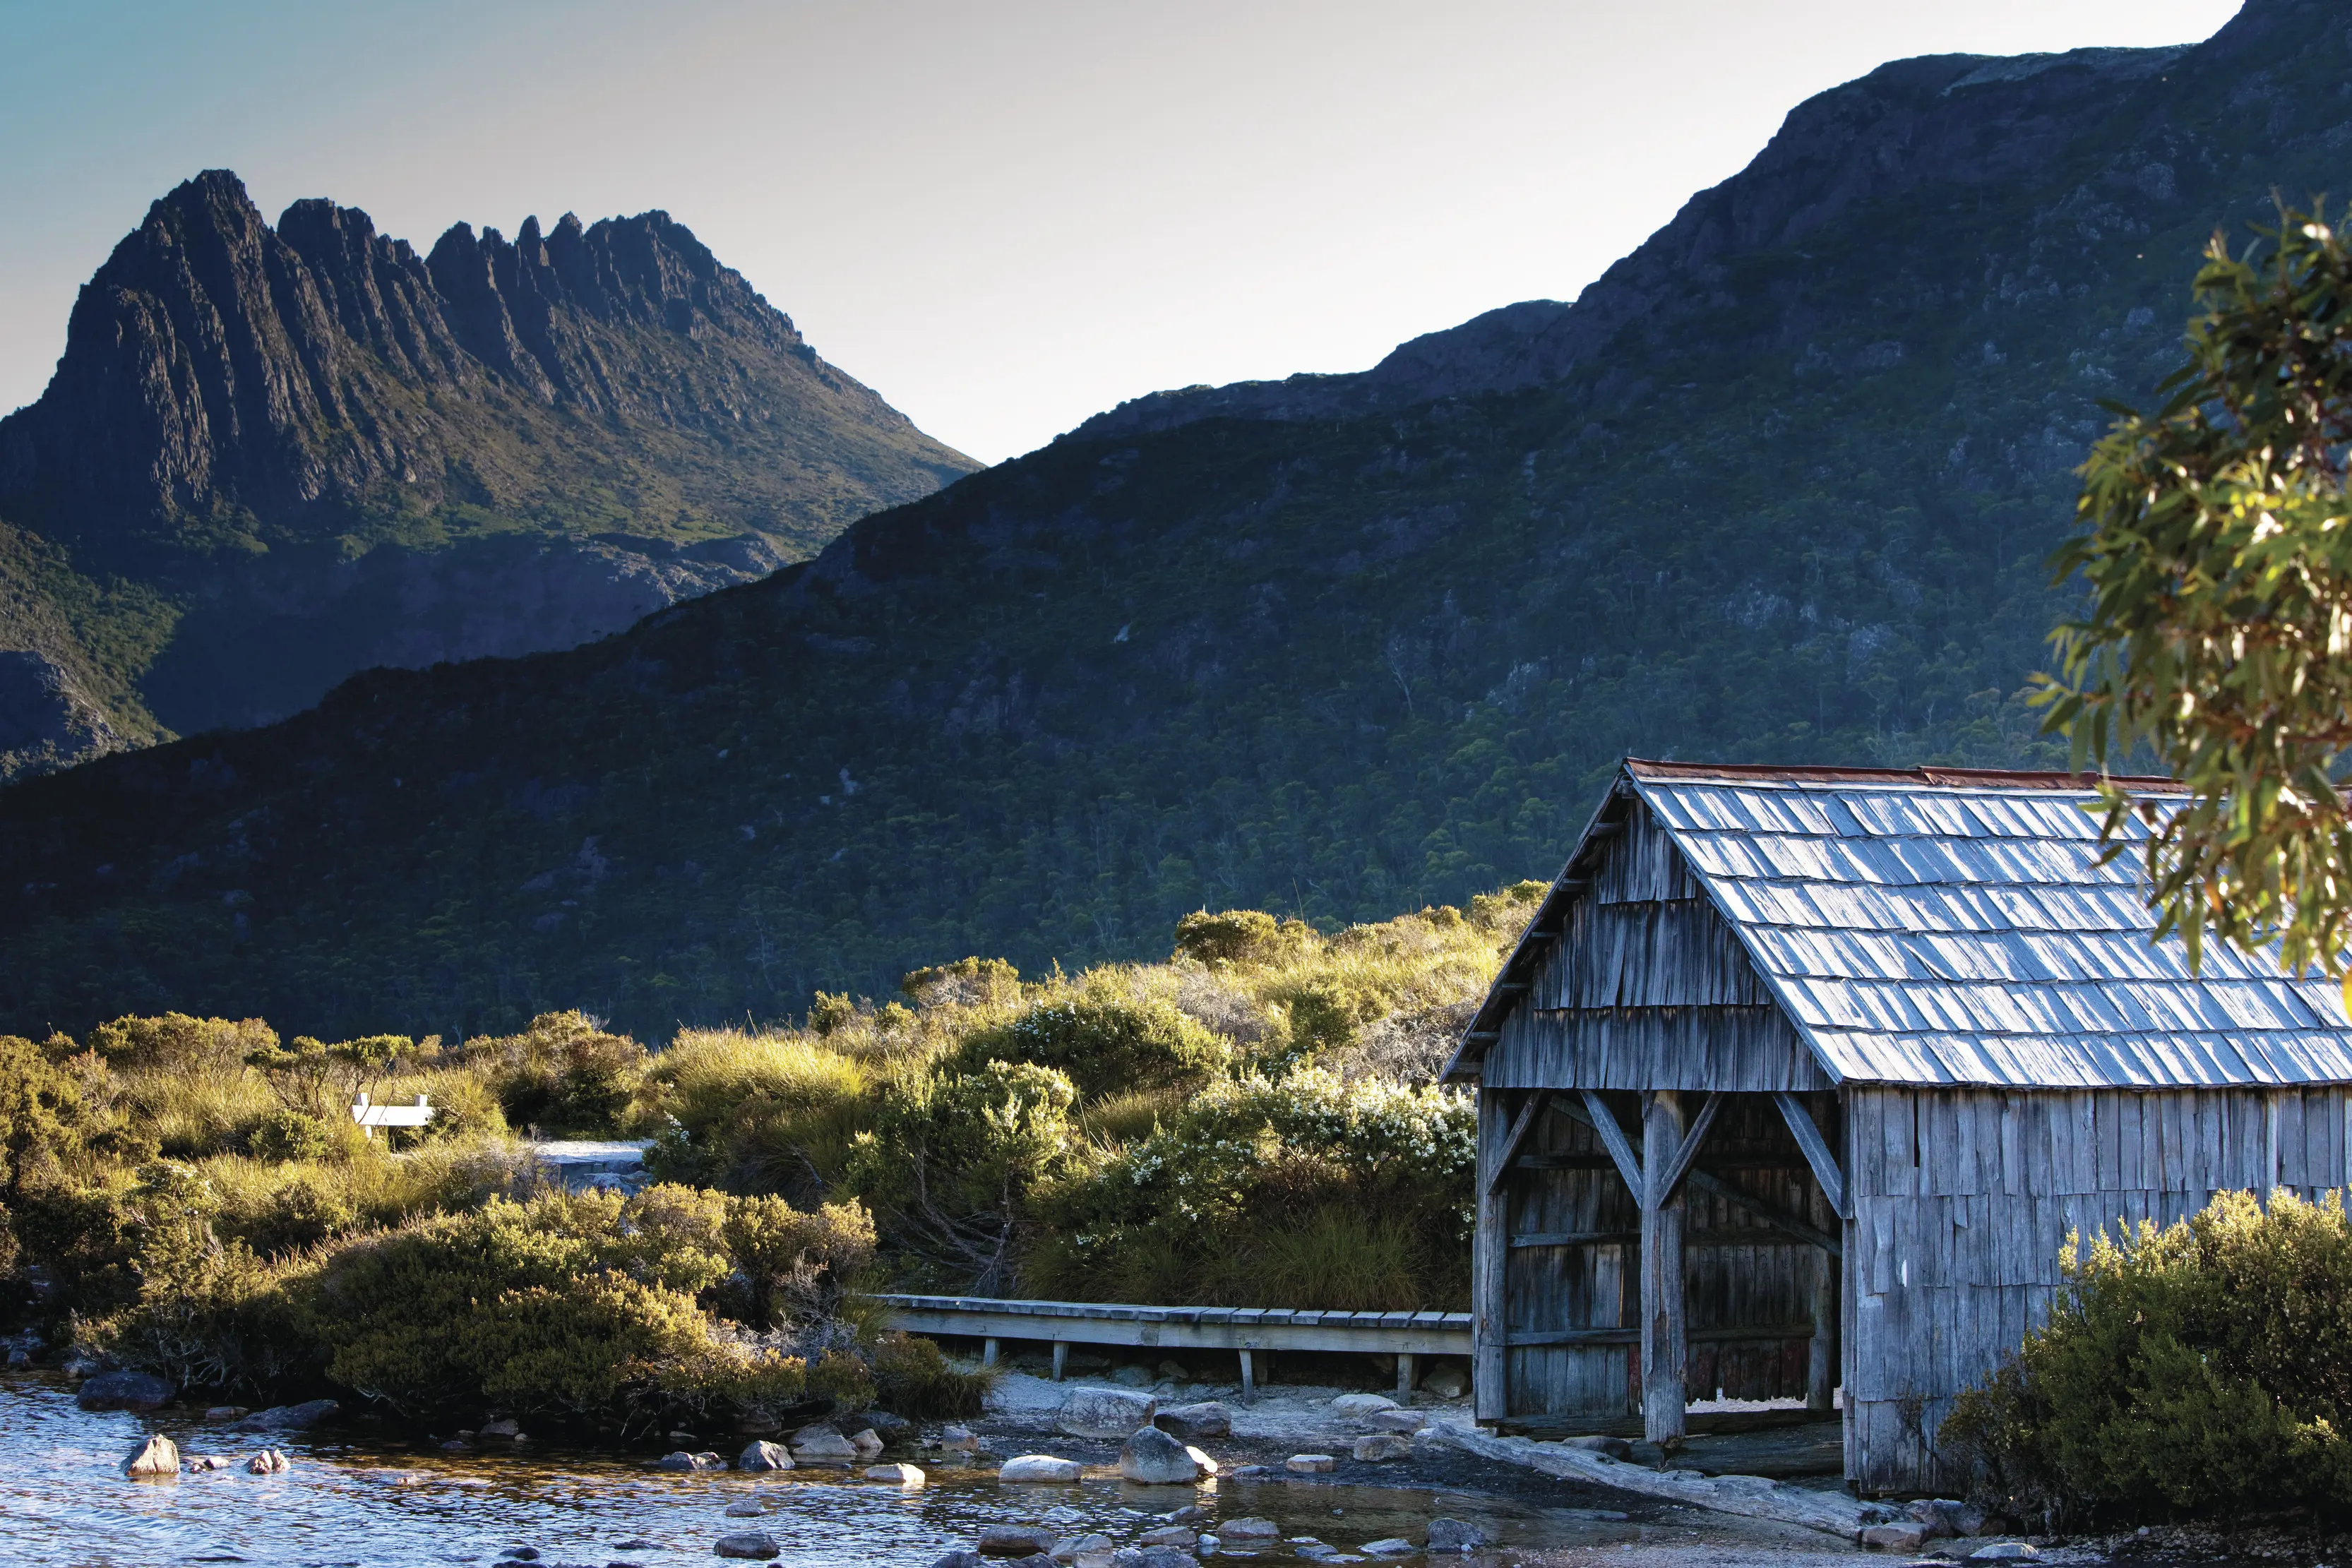 Boat Shed at Dove Lake, and with Cradle Mountain